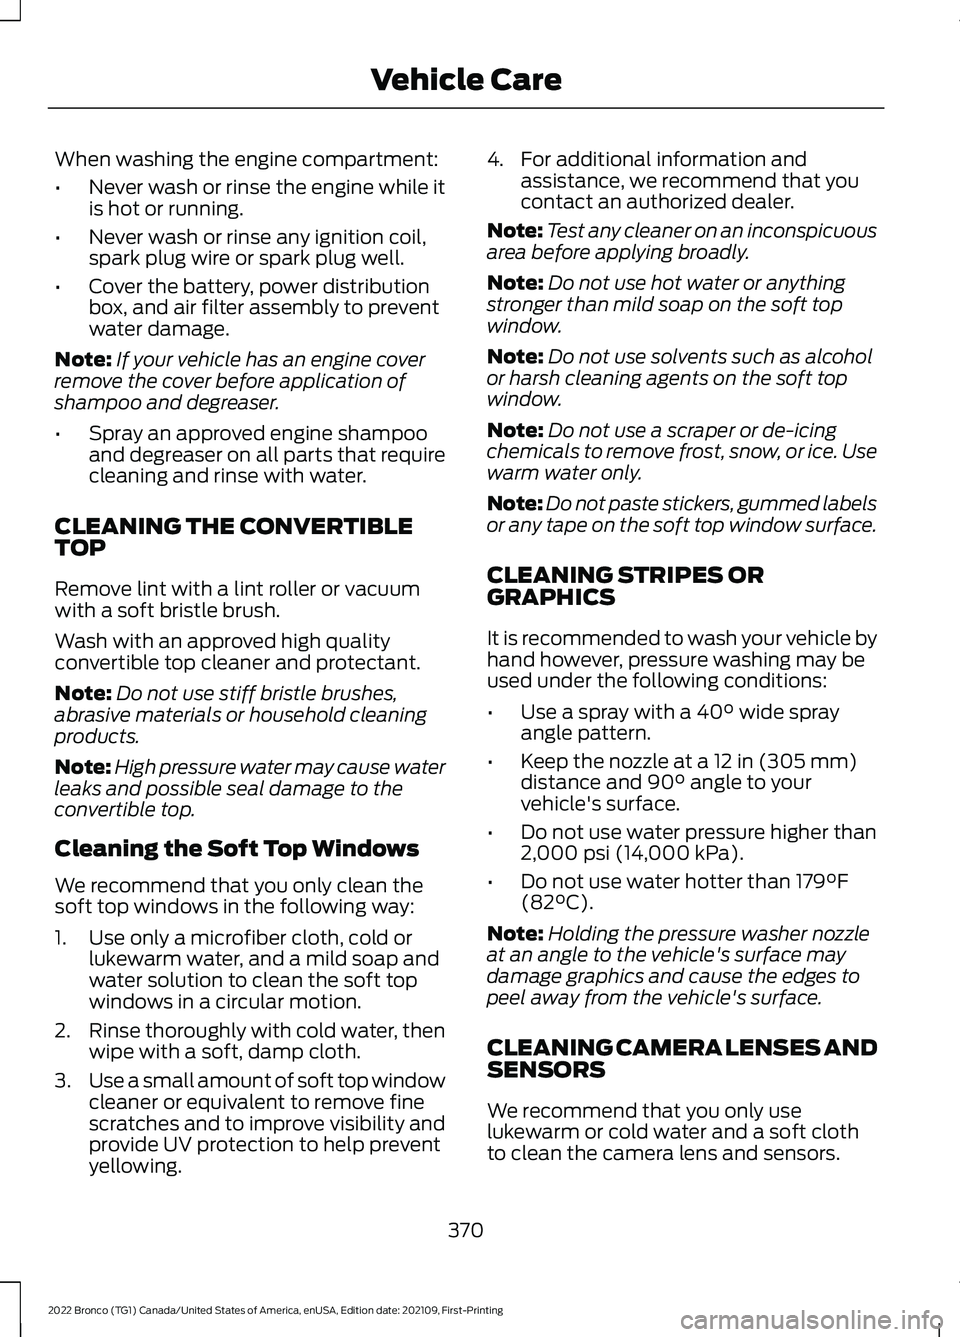 FORD BRONCO 2022  Owners Manual When washing the engine compartment:
•Never wash or rinse the engine while itis hot or running.
•Never wash or rinse any ignition coil,spark plug wire or spark plug well.
•Cover the battery, pow